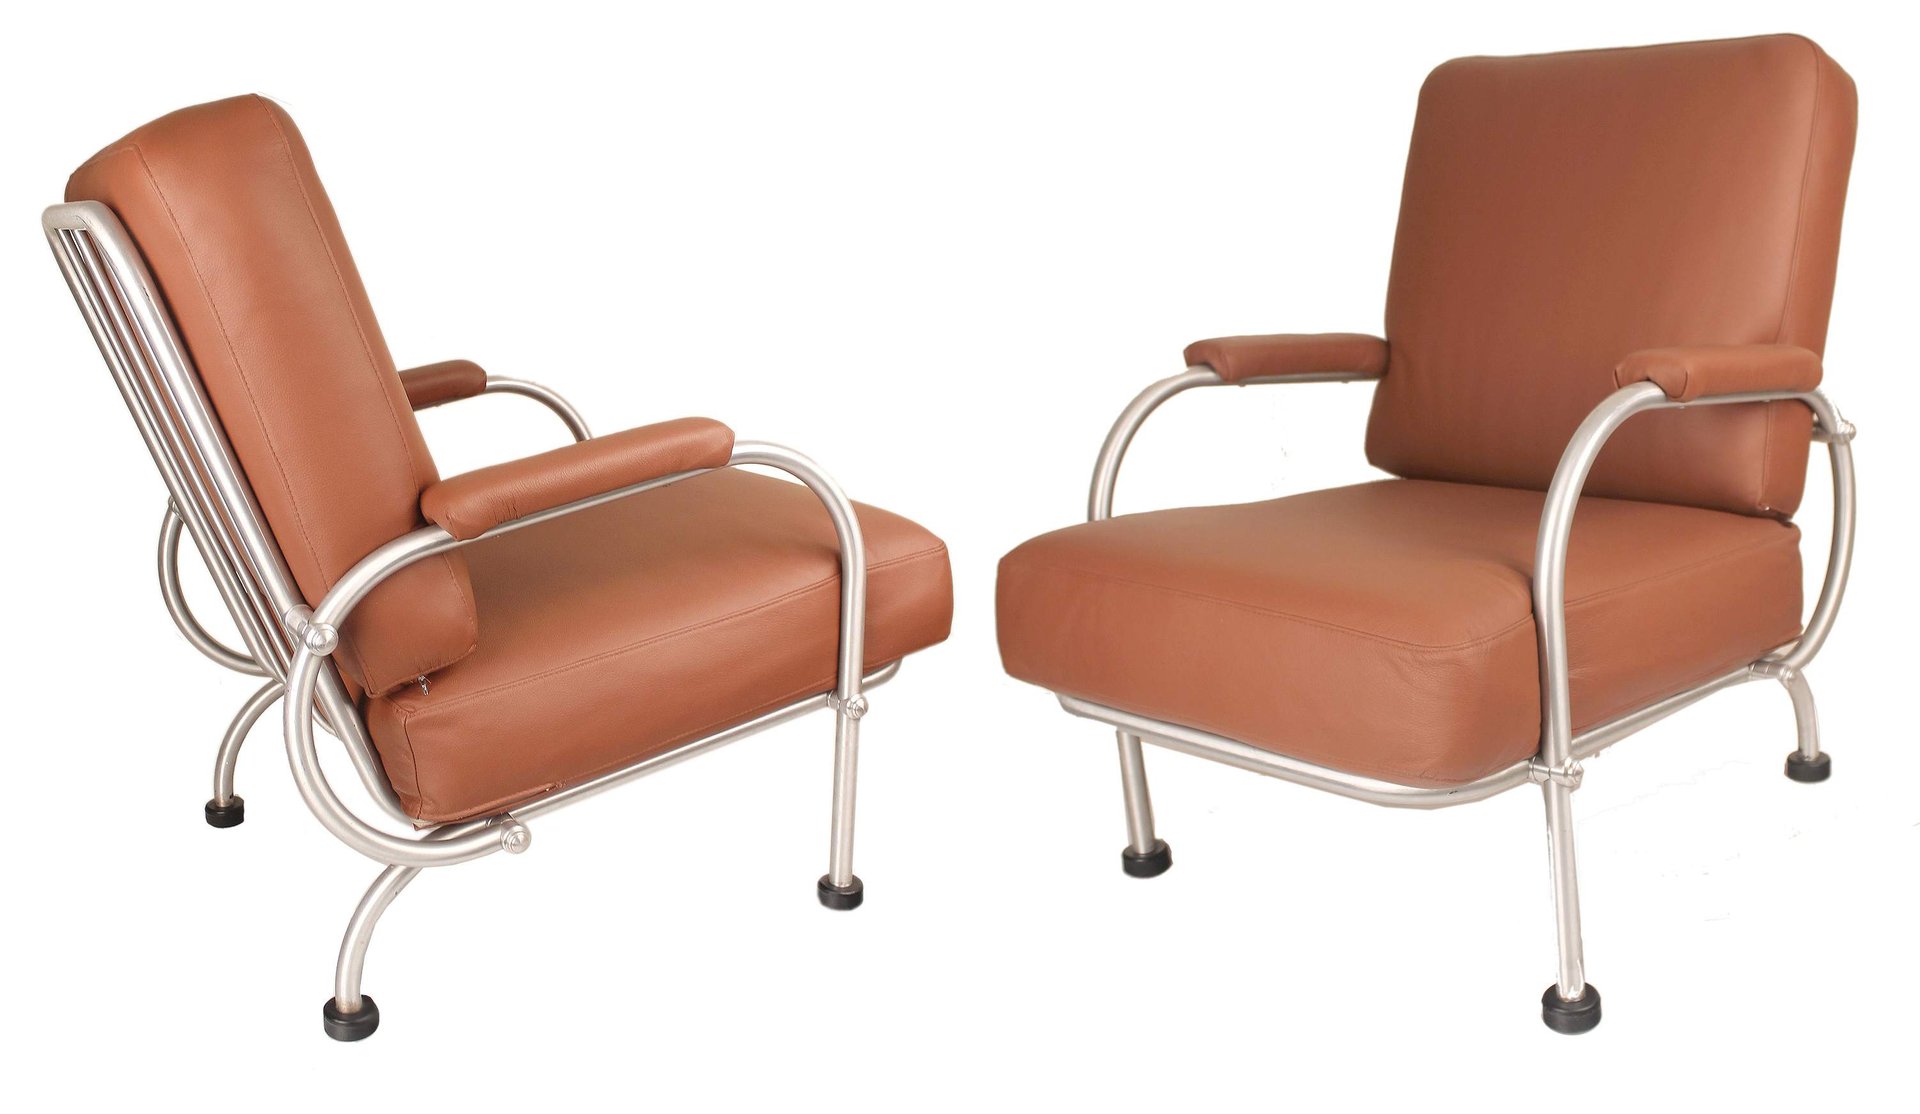 art deco leather lounge chairs from warren mcarthur 1930s set of 2 1 GUT-1001699